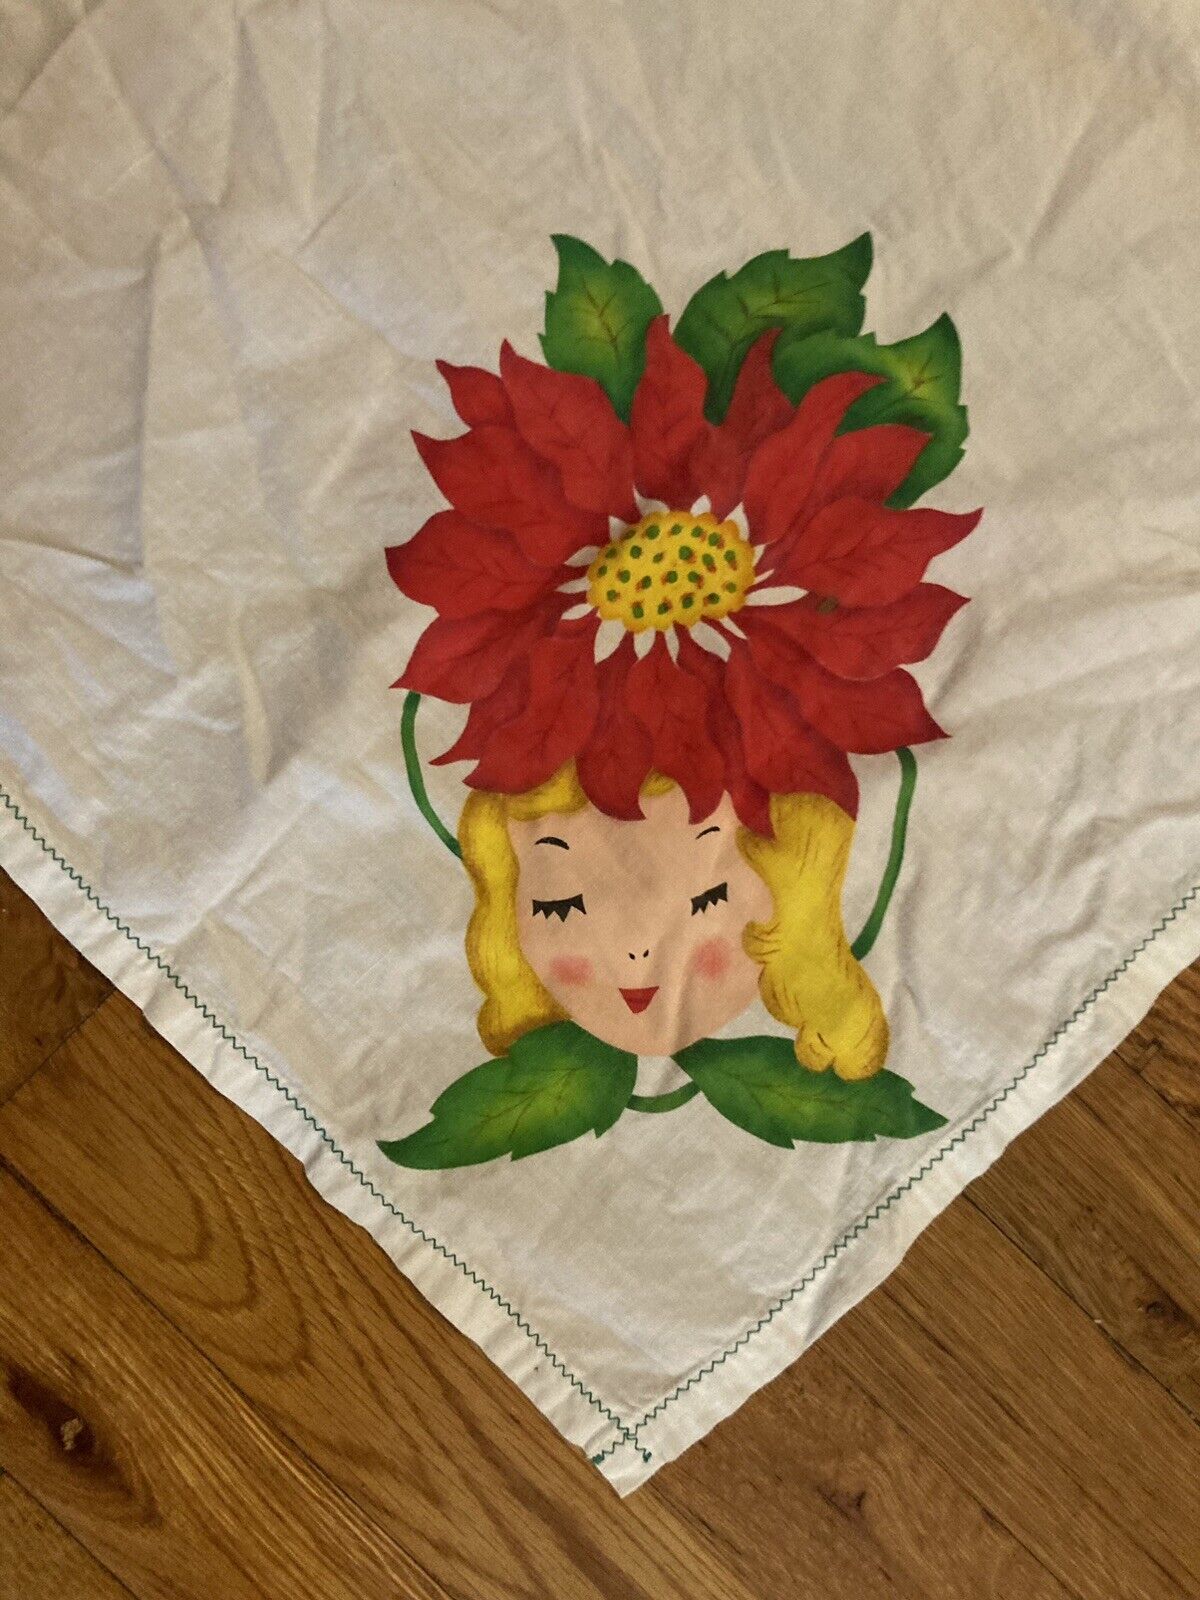 Vintage MCM Printed Tablecloth ~ Girl’s Face With Poinsettia And Leaves 31 x 34”